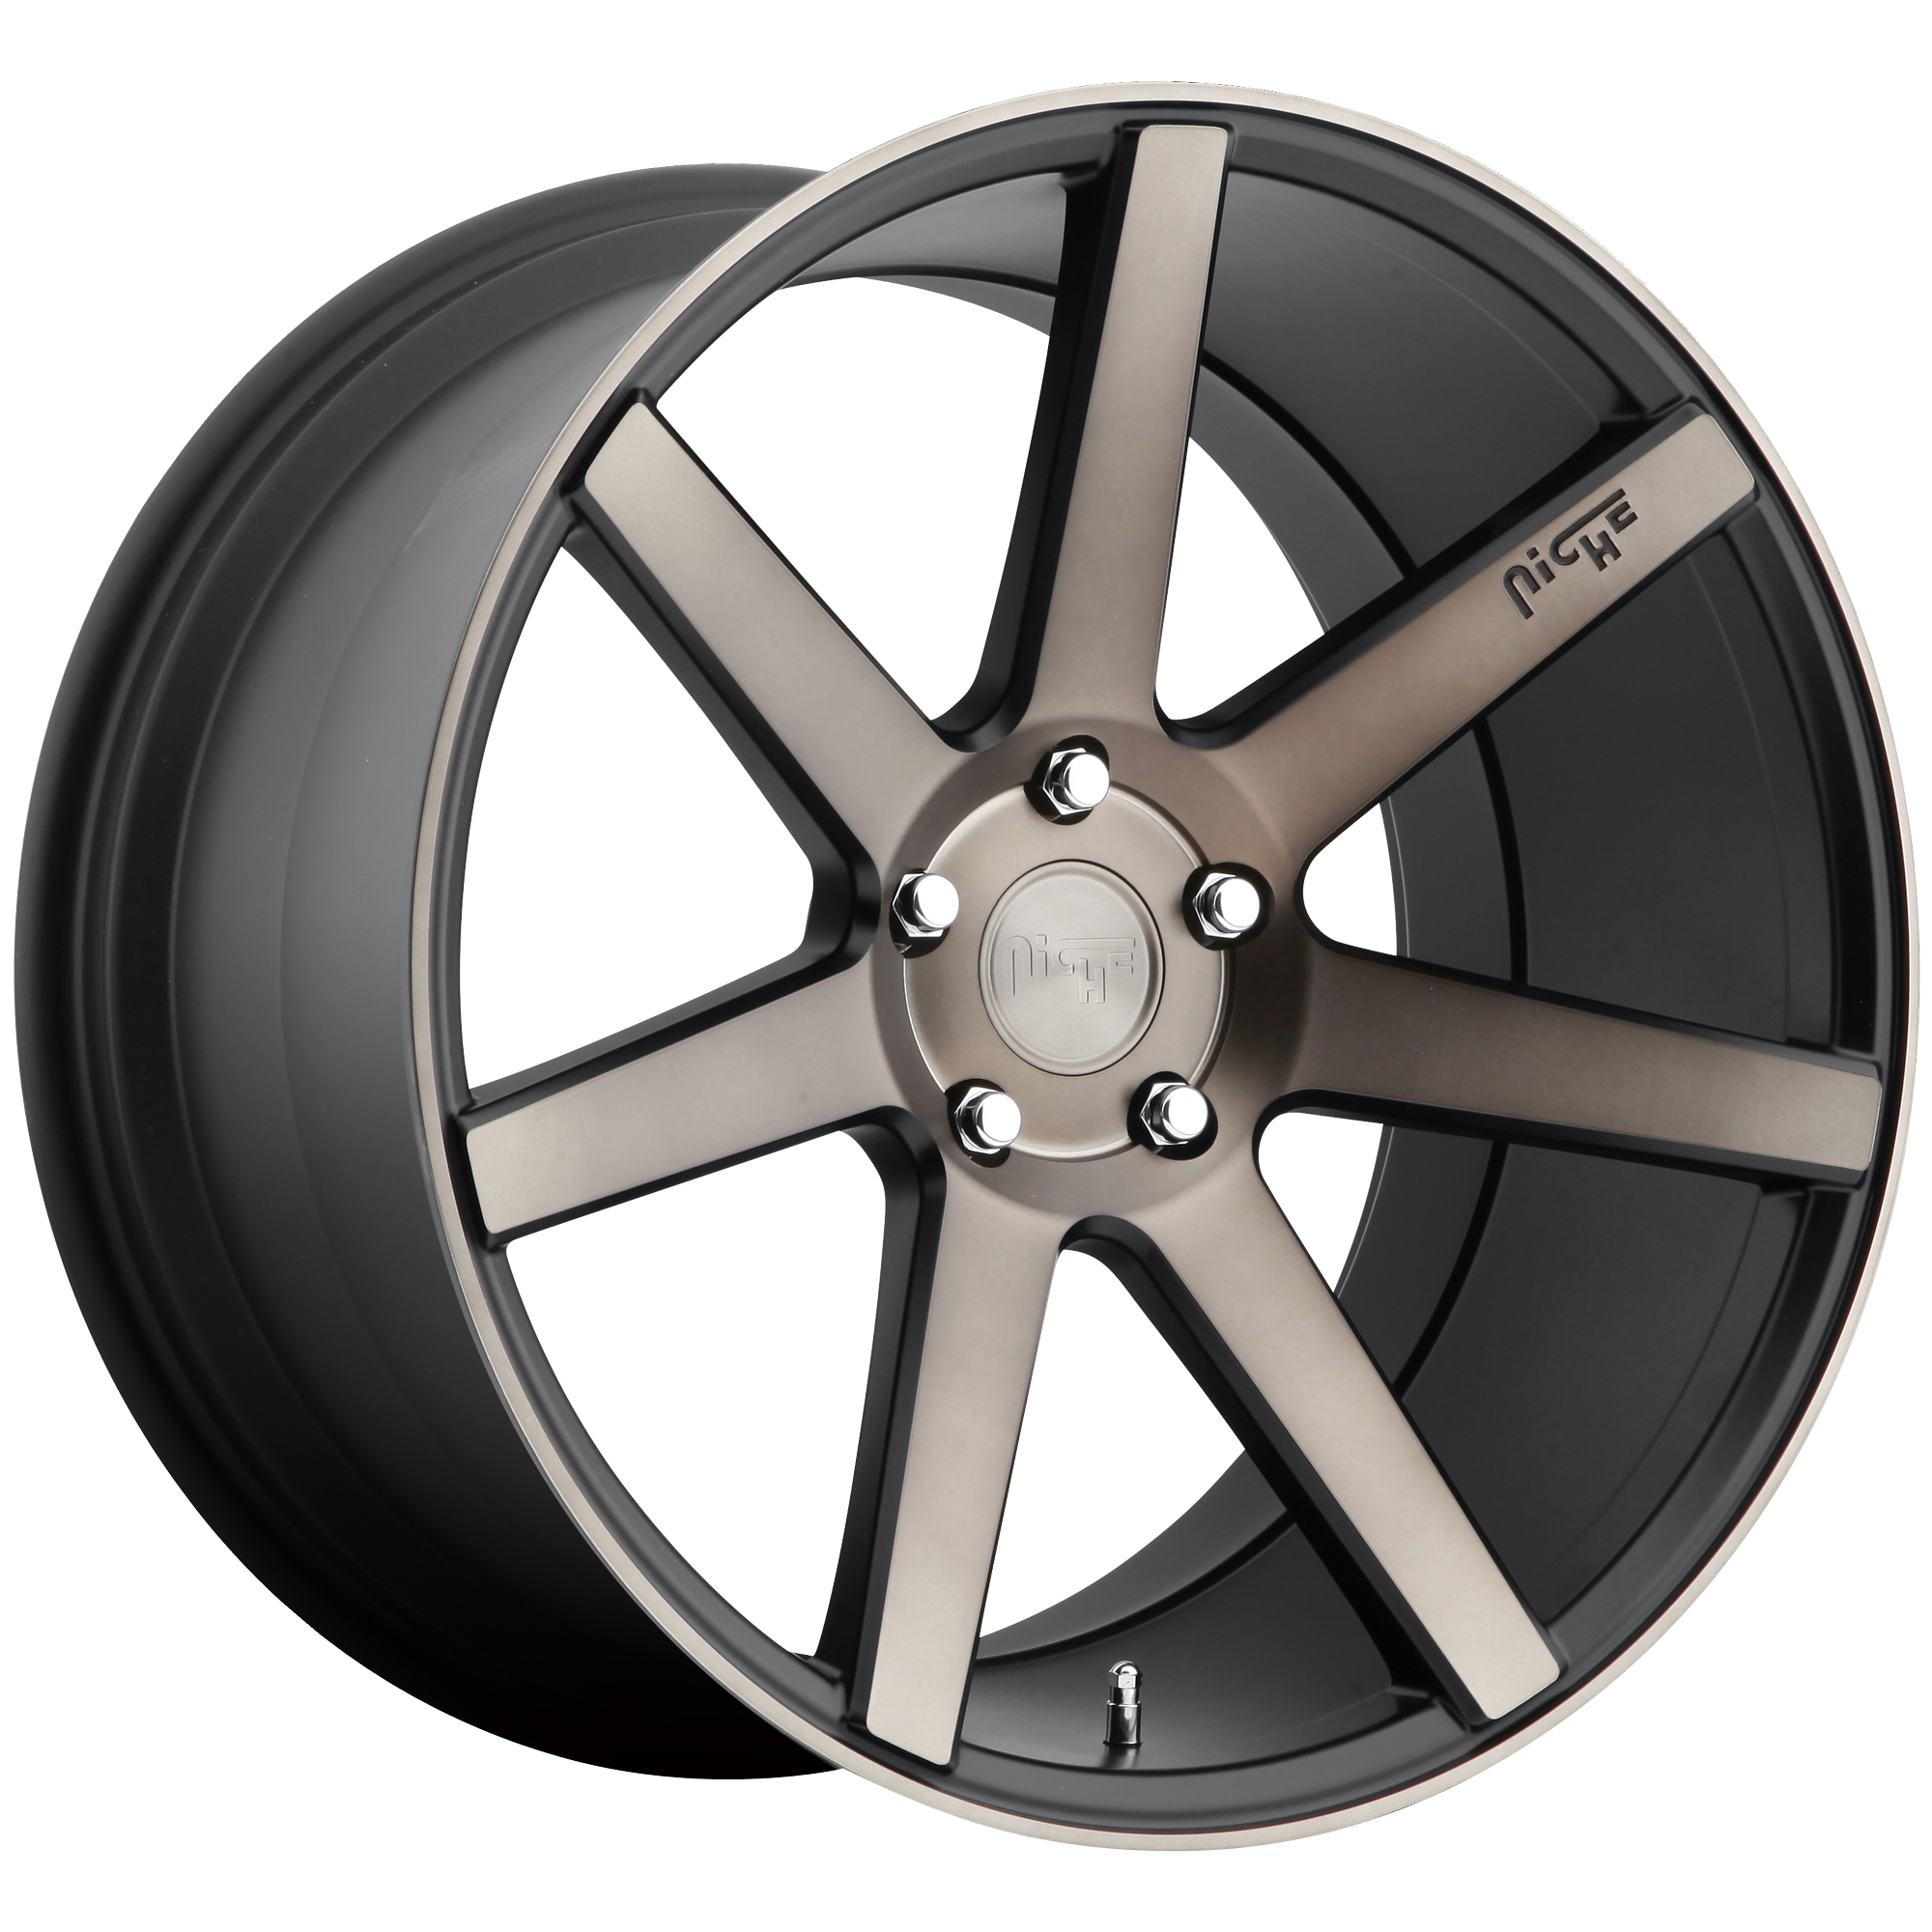 VERONA 18x8 5x100.00 MATTE BLACK MACHINED (40 mm) - Tires and Engine Performance